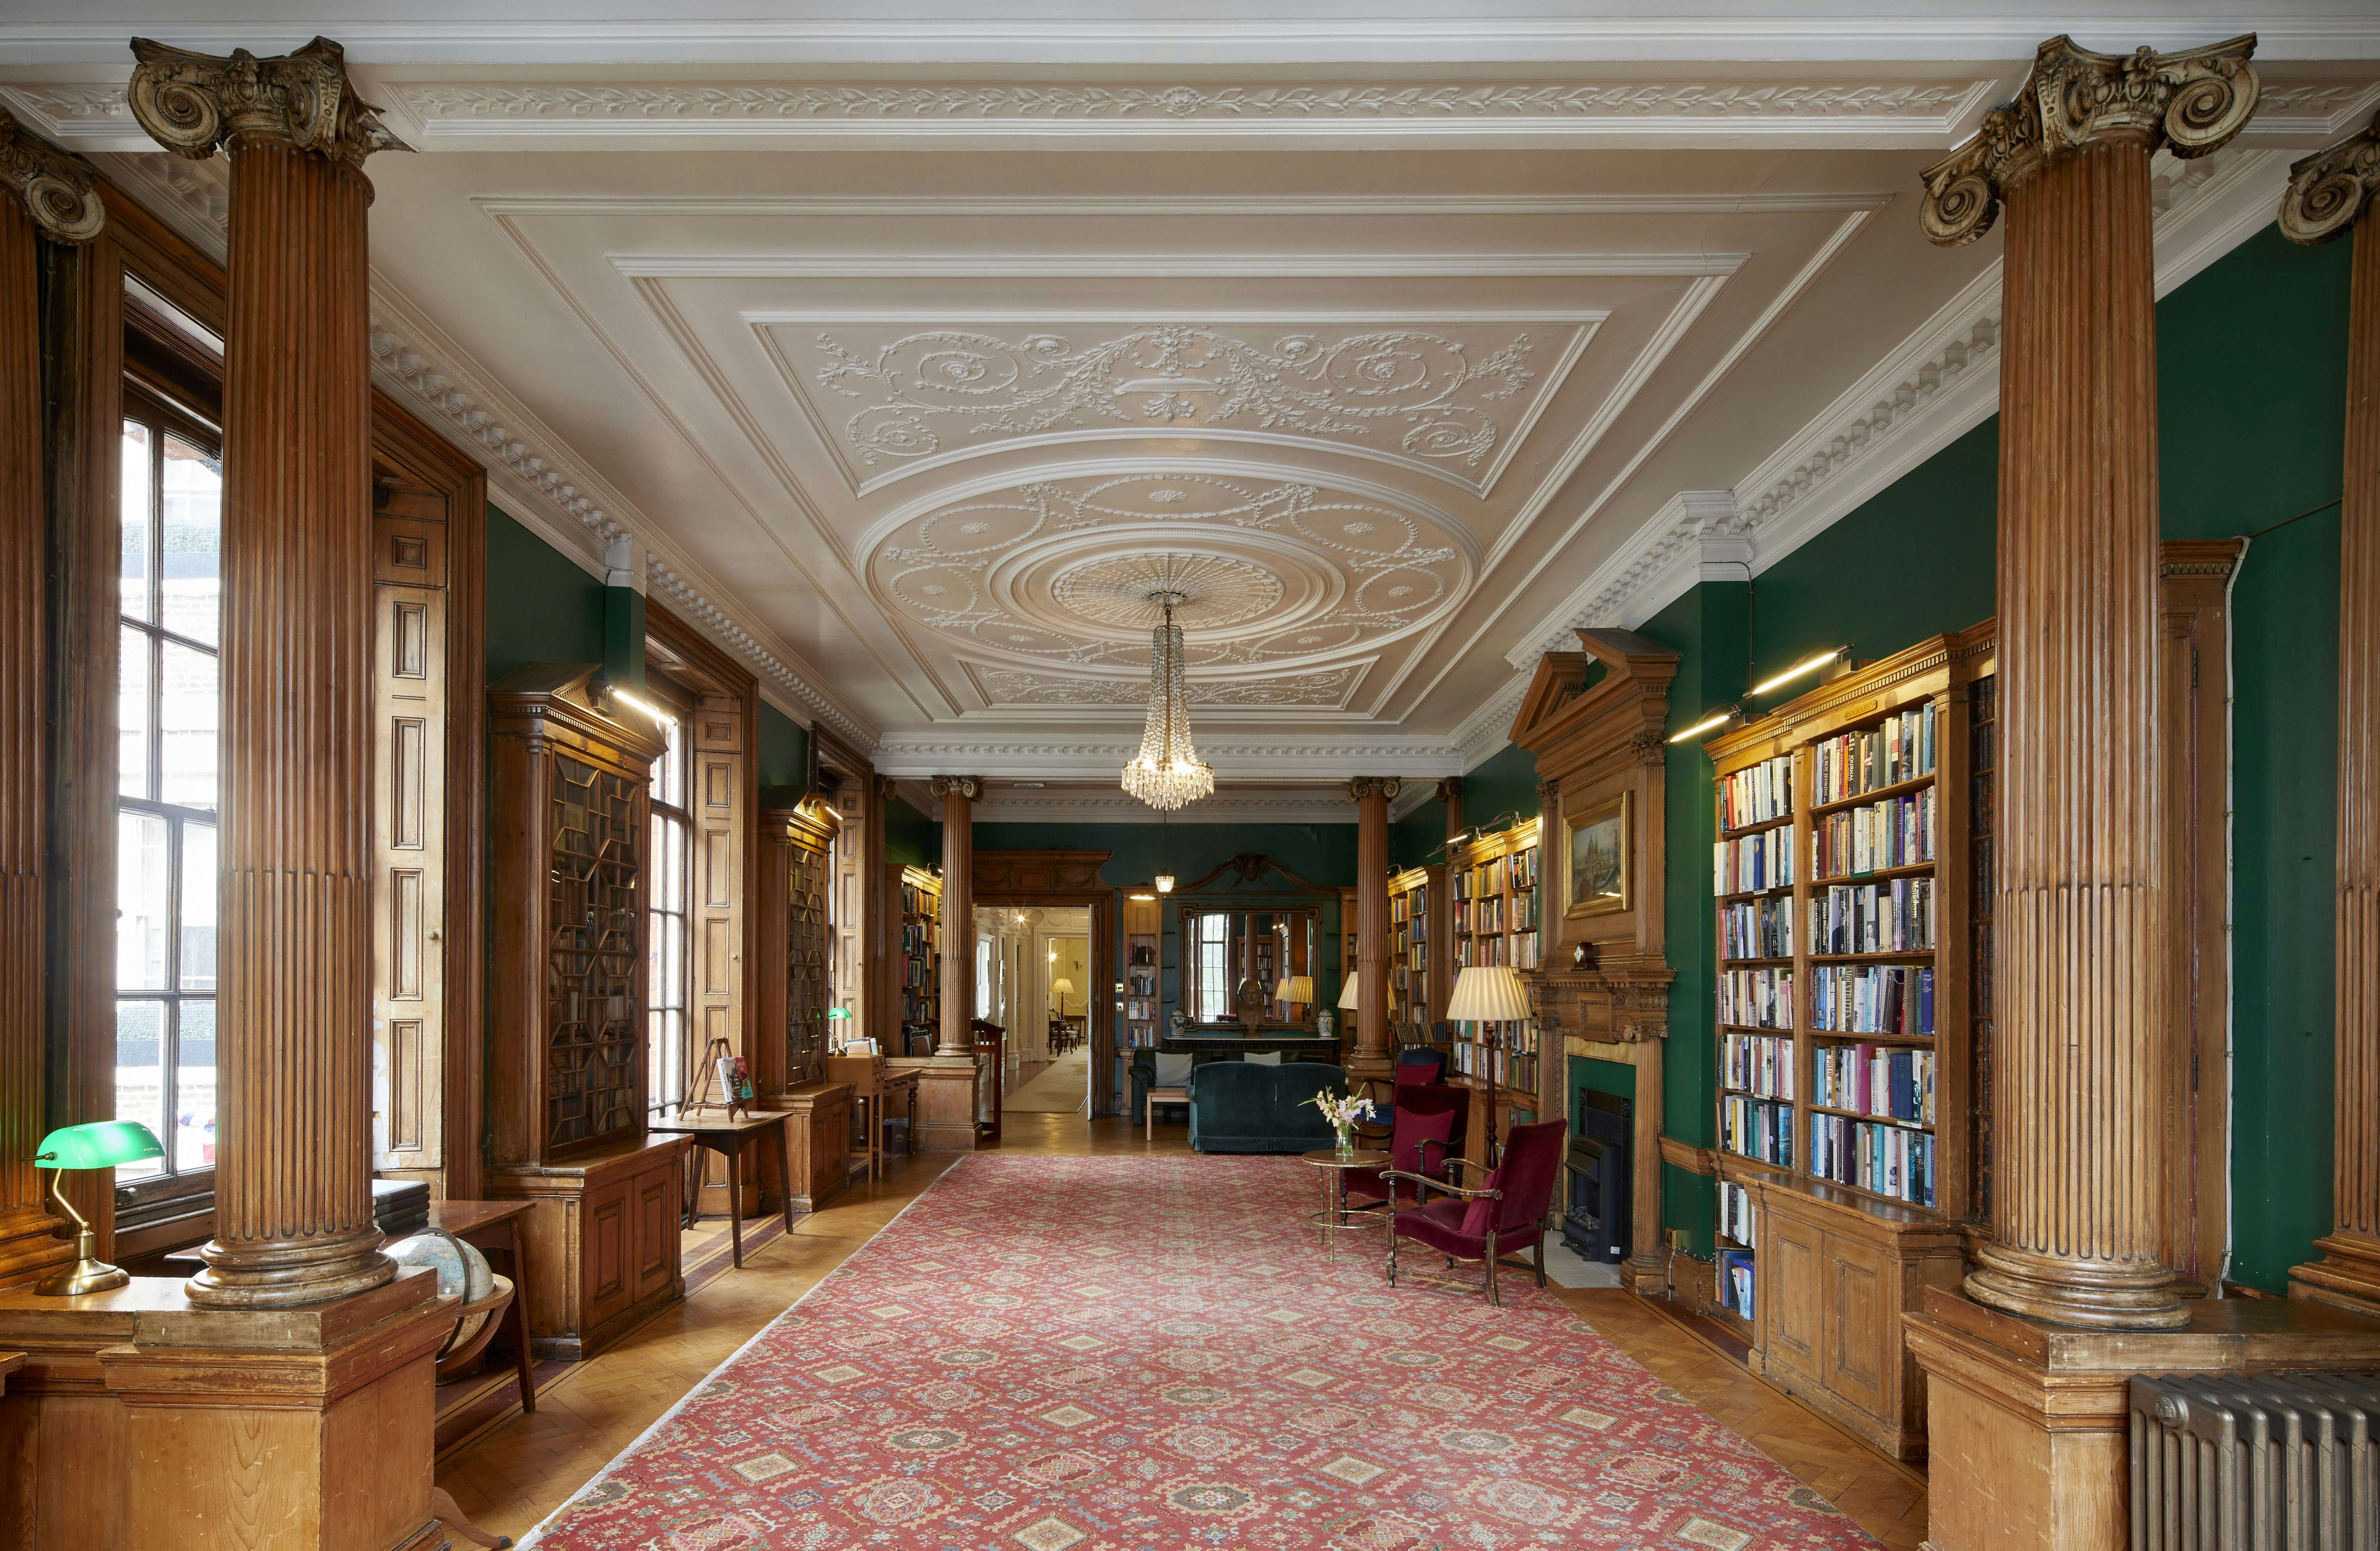 University Women's Club - The Library image 8